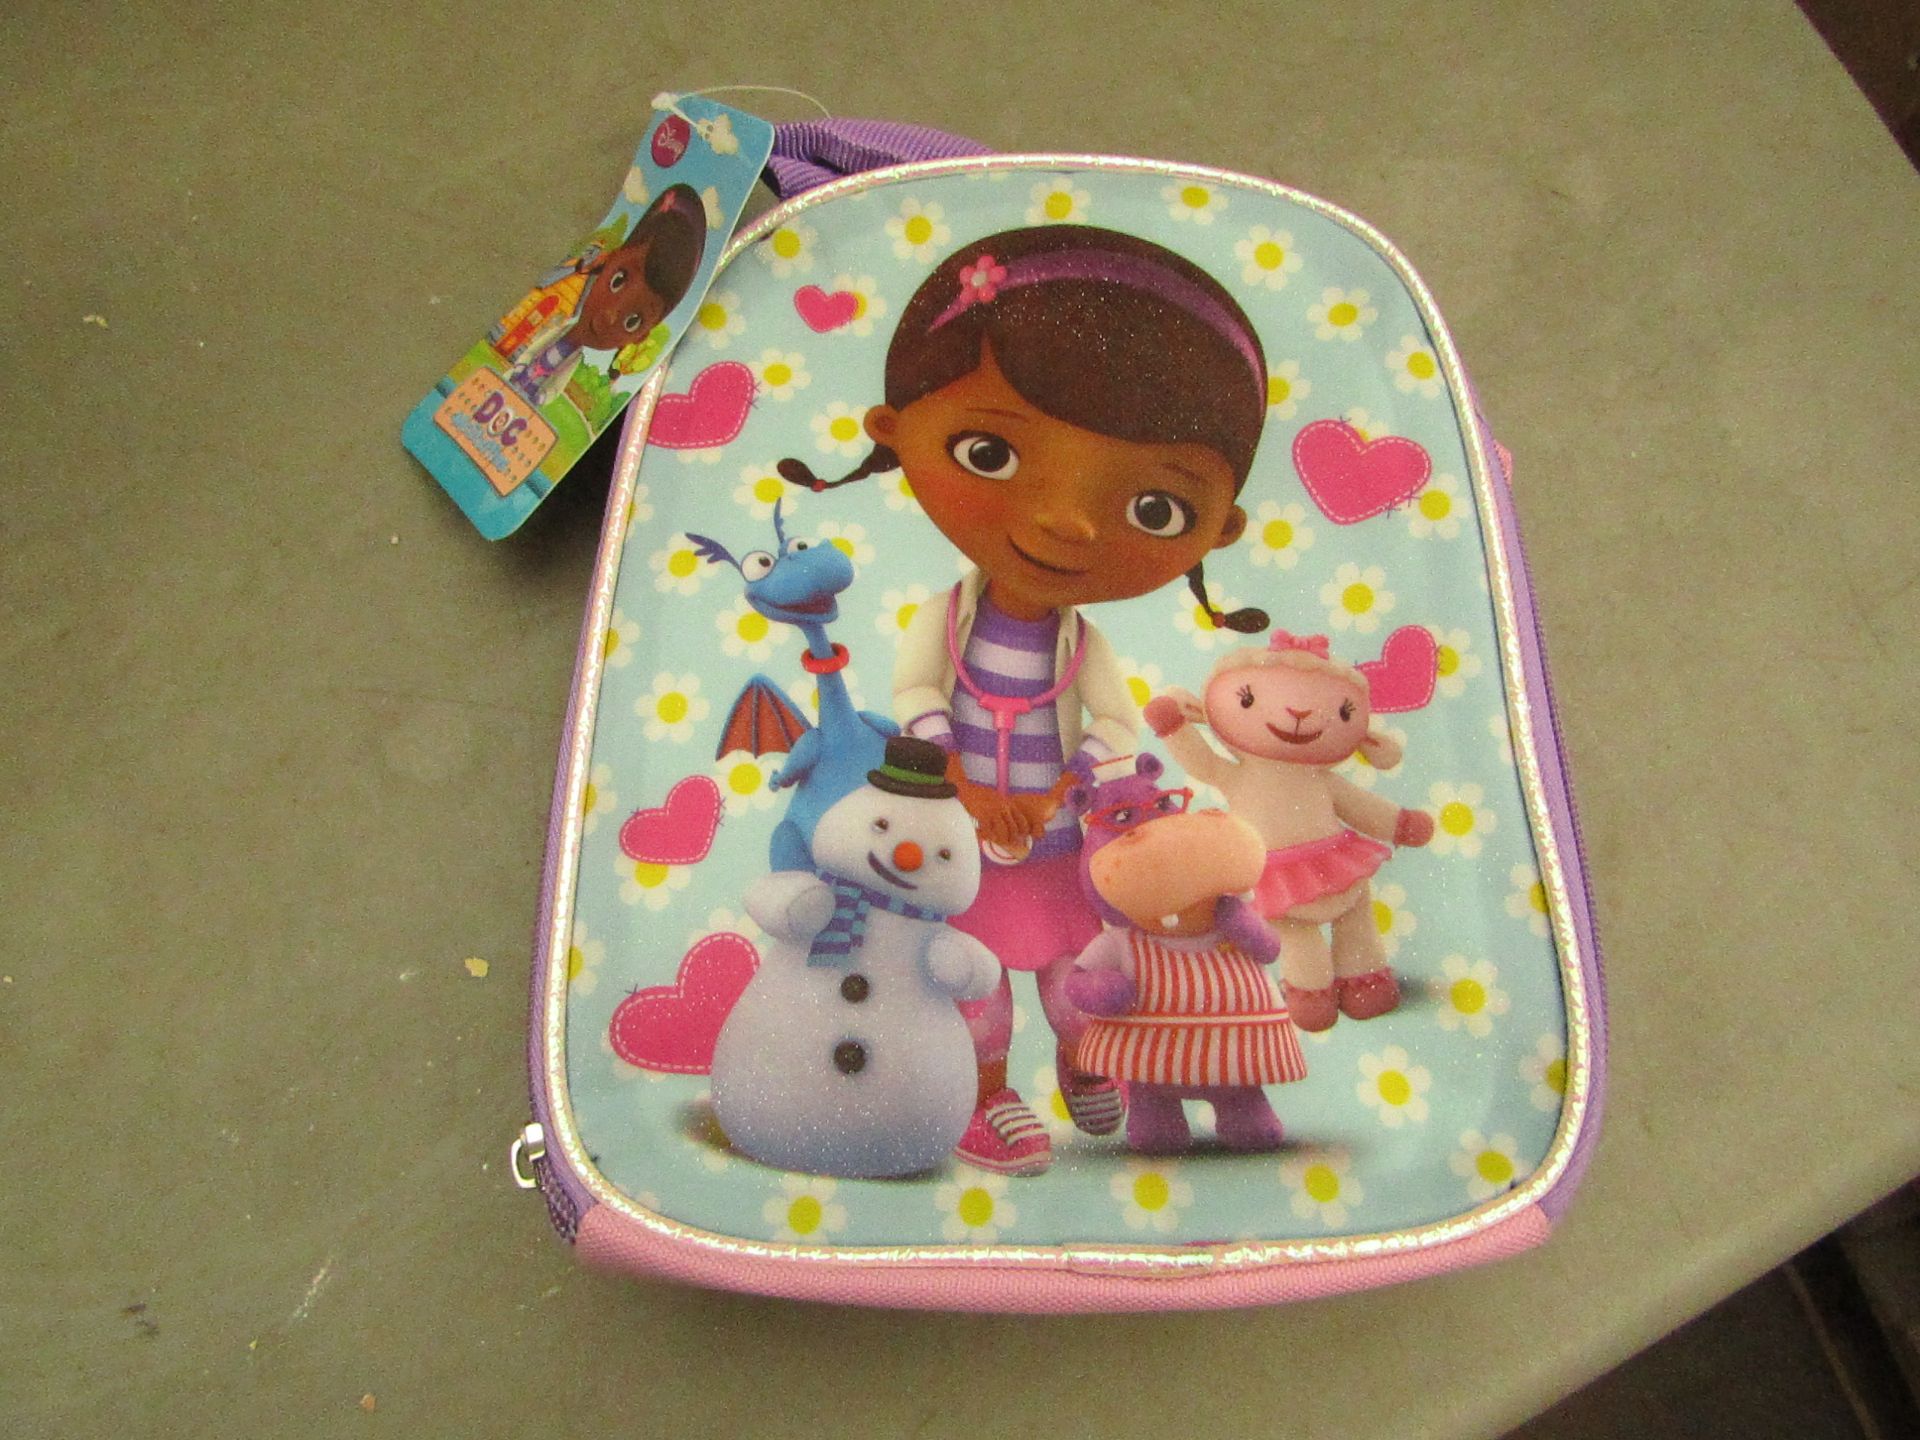 5 x Disney Junior - Doc Mcstuffins Fabric Lunch Box RRP £5.49 each- New & Packaged.